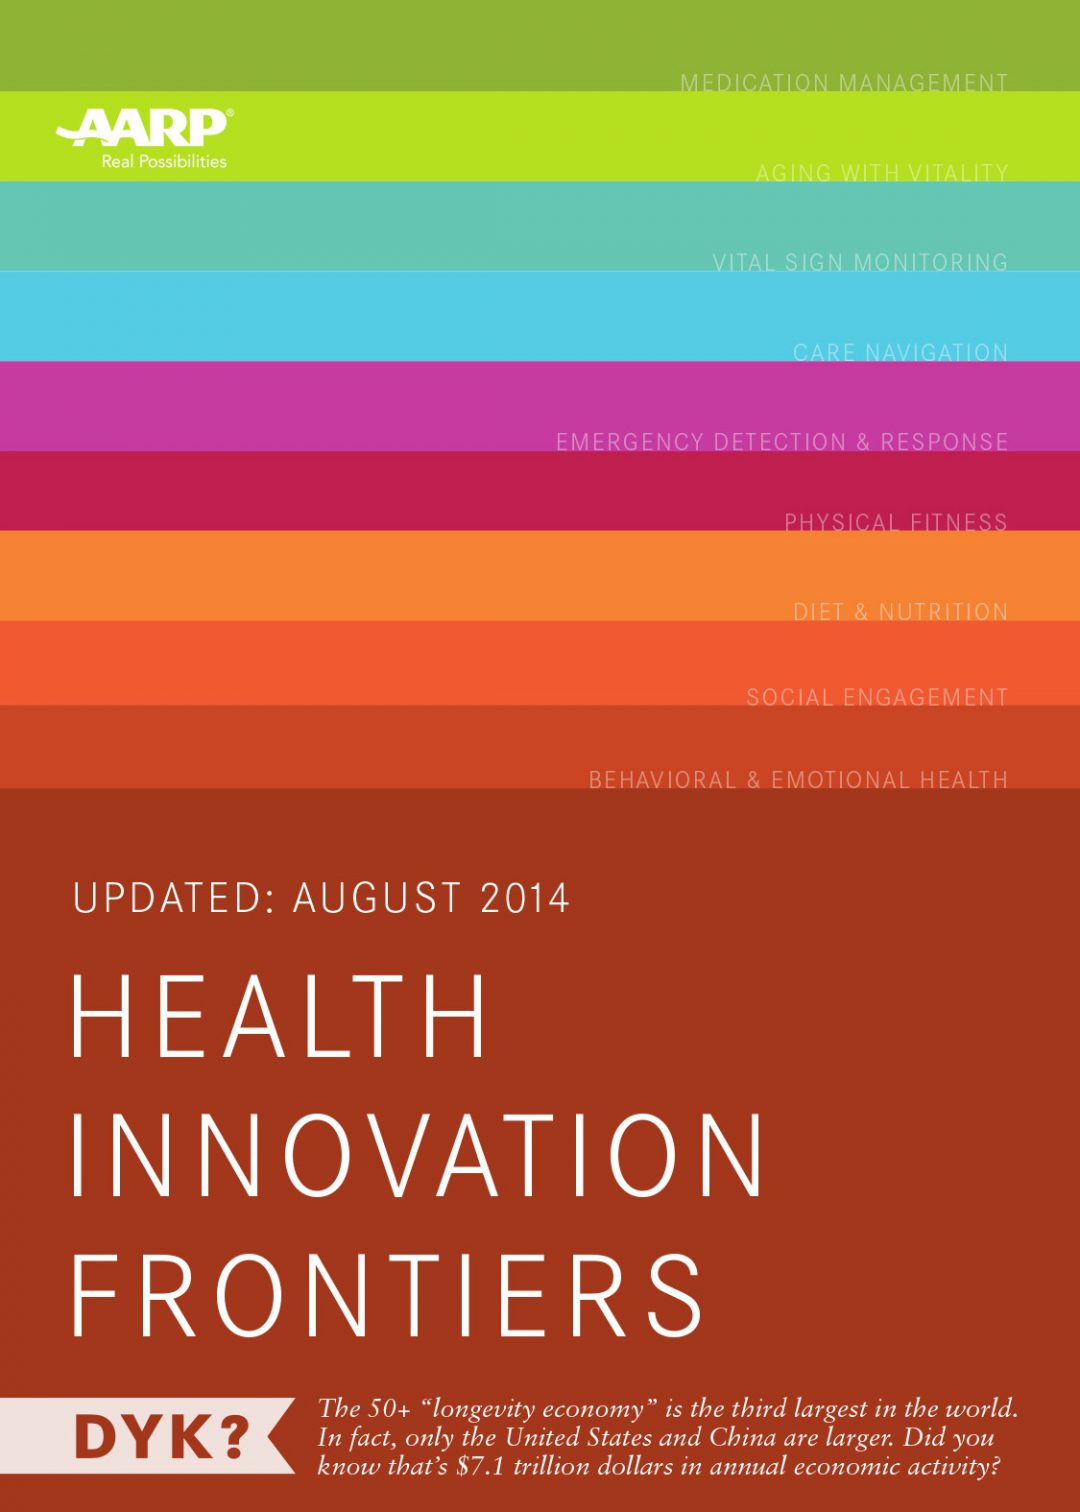 Cover design from the Health Innovation Frontiers report